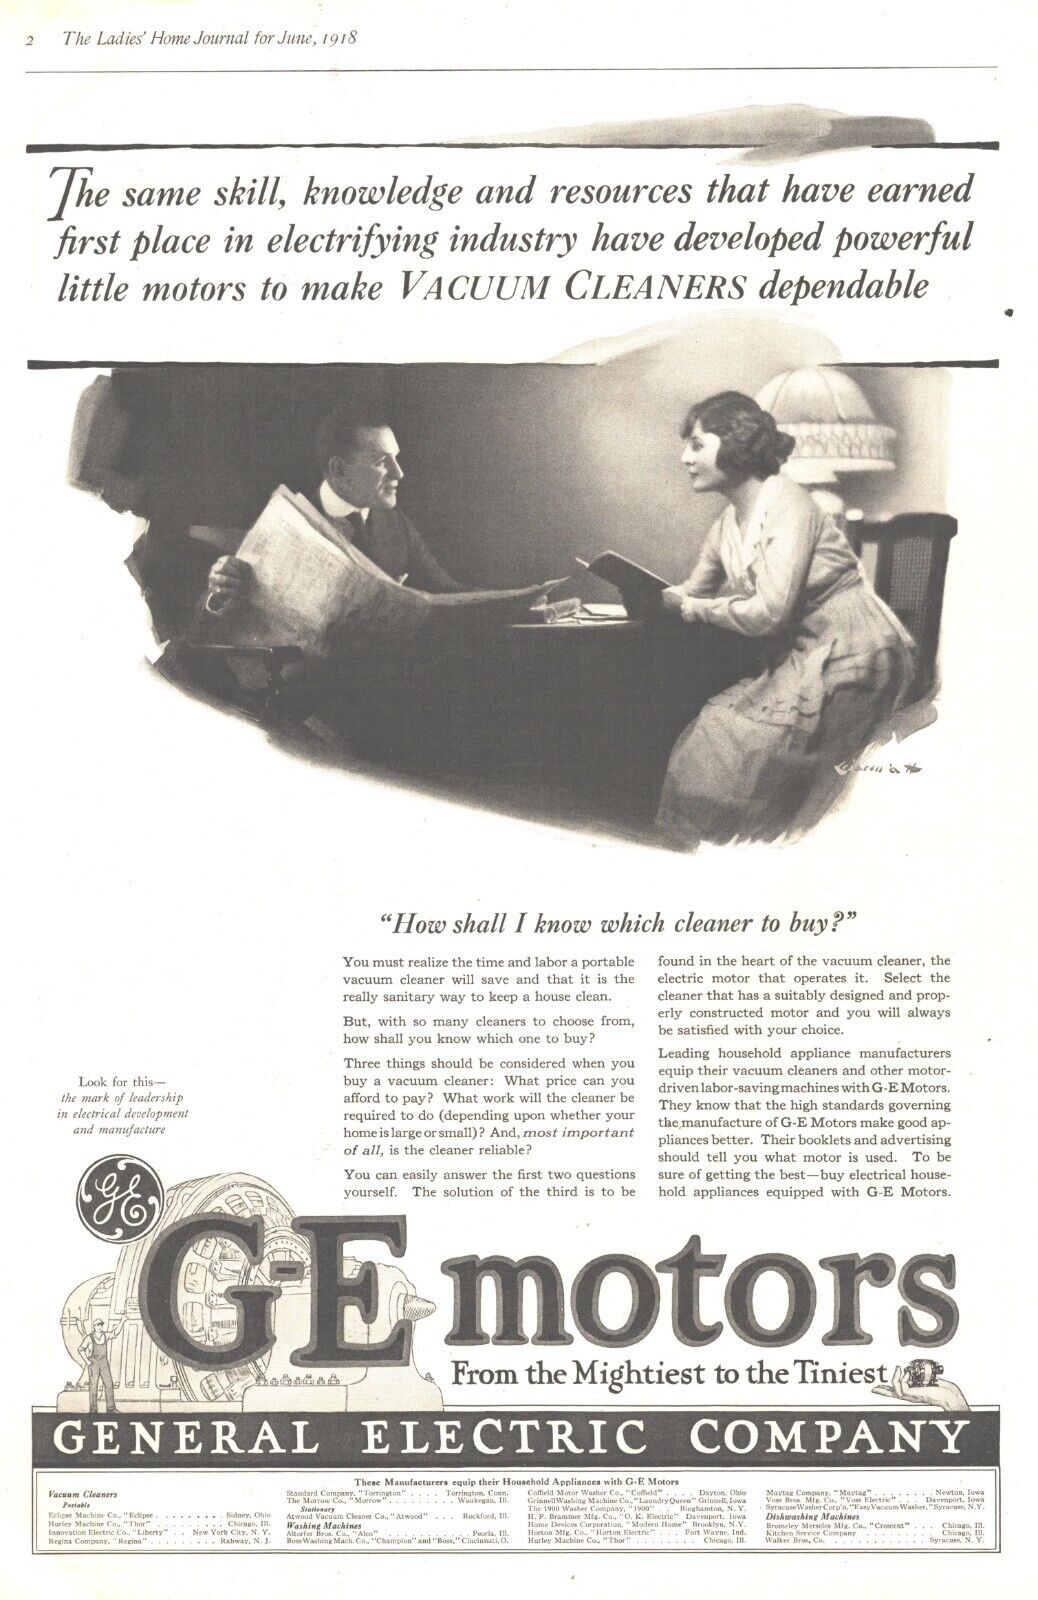 1918 General Electric Motors Antique Print Ad WW1 Era From Mightiest To Tiniest